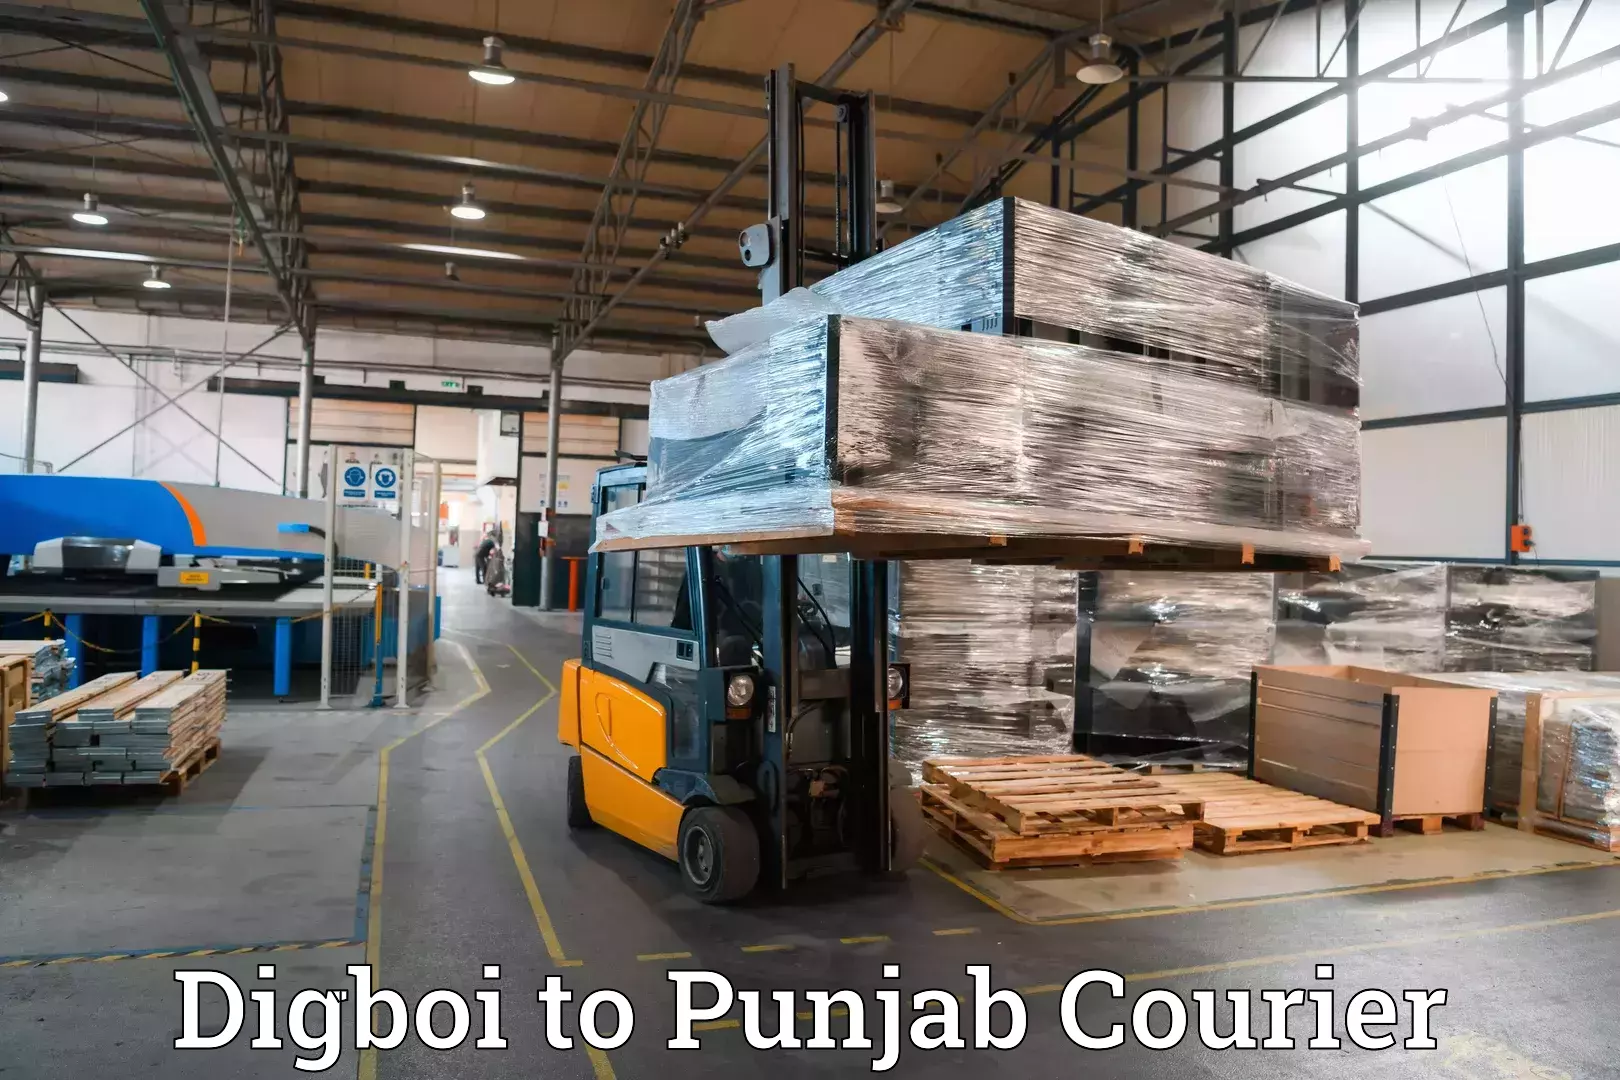 Luggage delivery app Digboi to Punjab